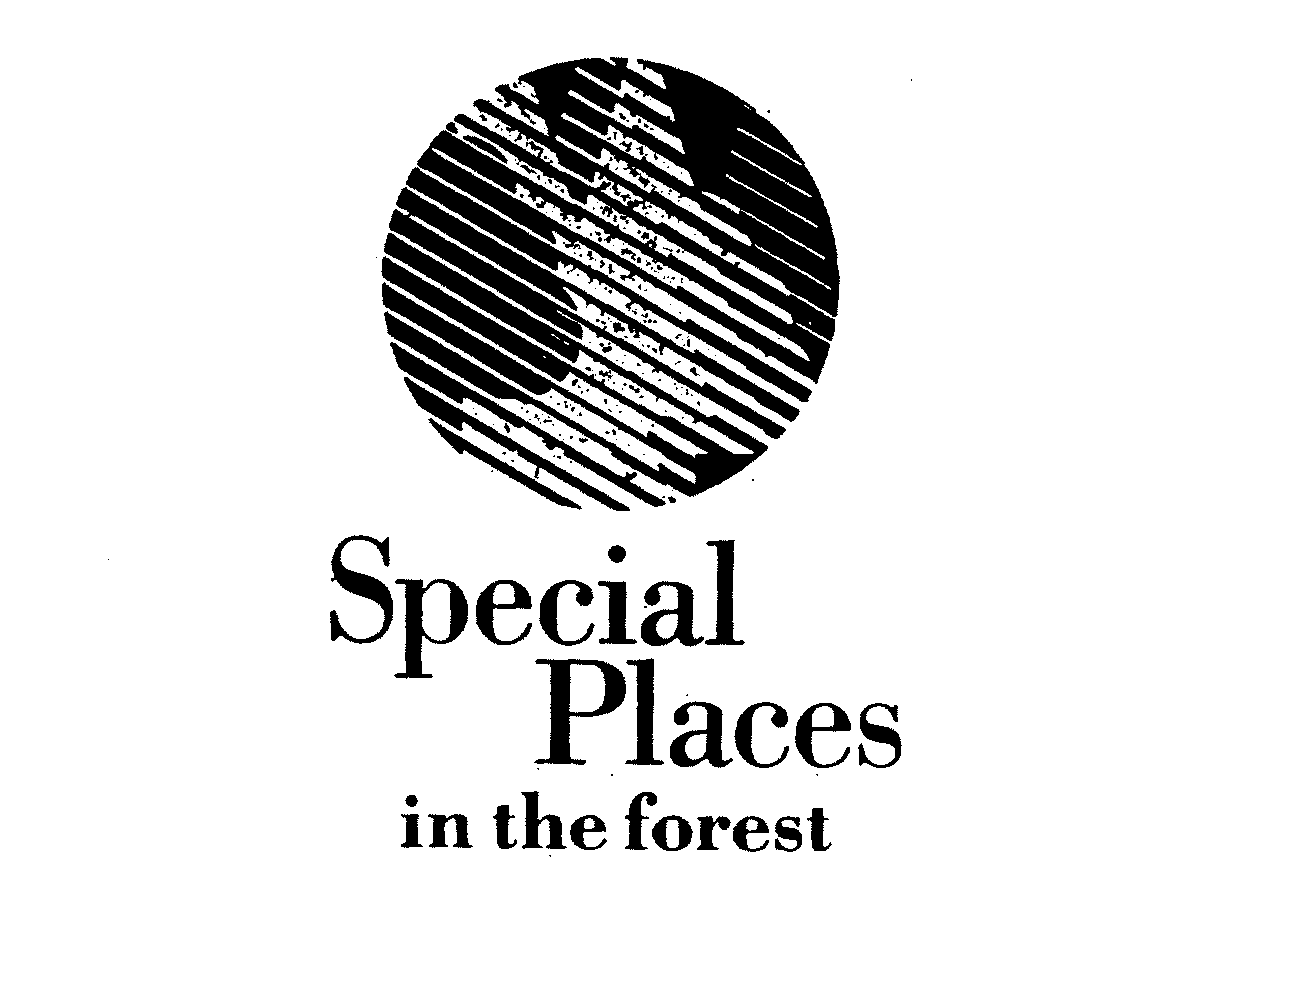  SPECIAL PLACES IN THE FOREST